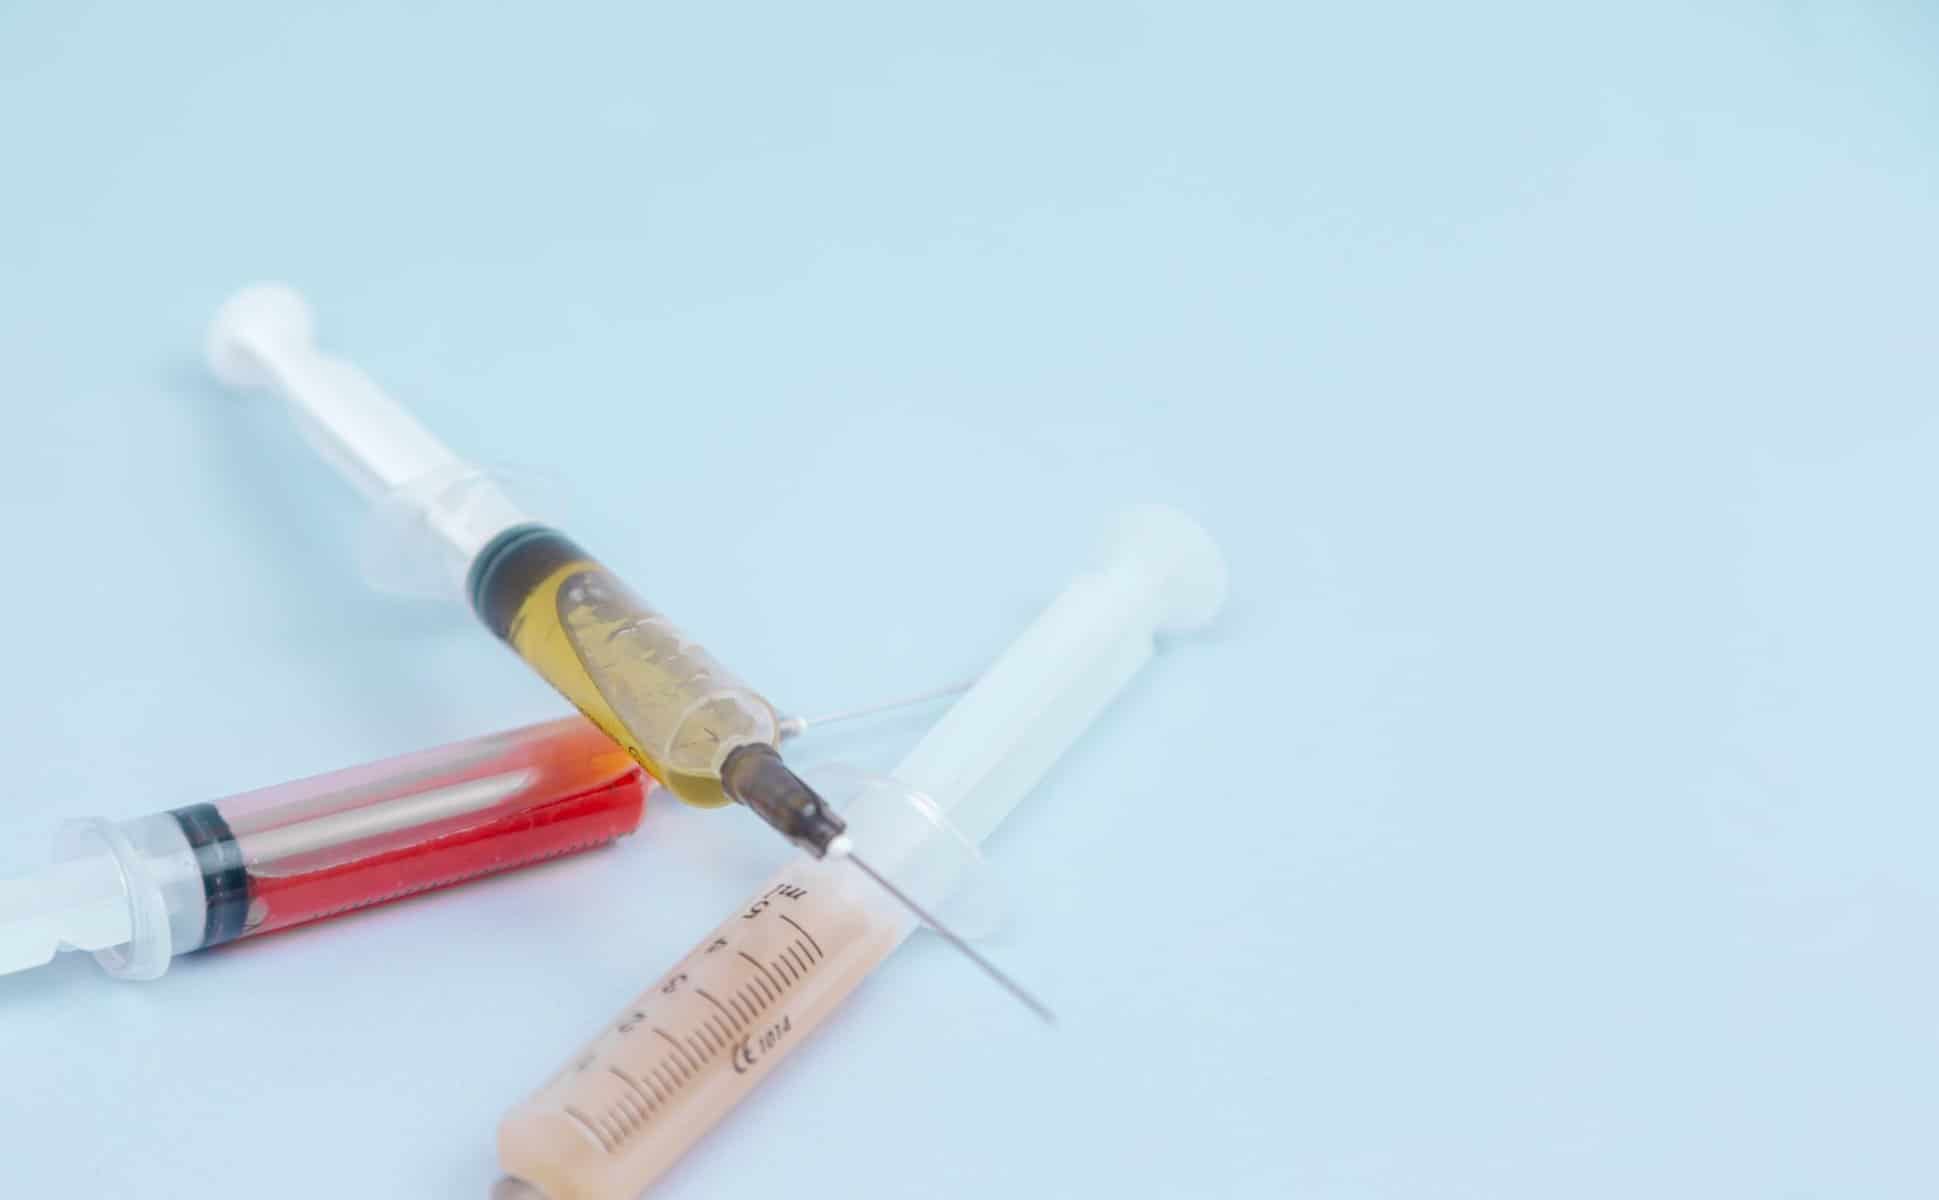 Three hypodermic needles filled with different color liquids lay on a white surface.